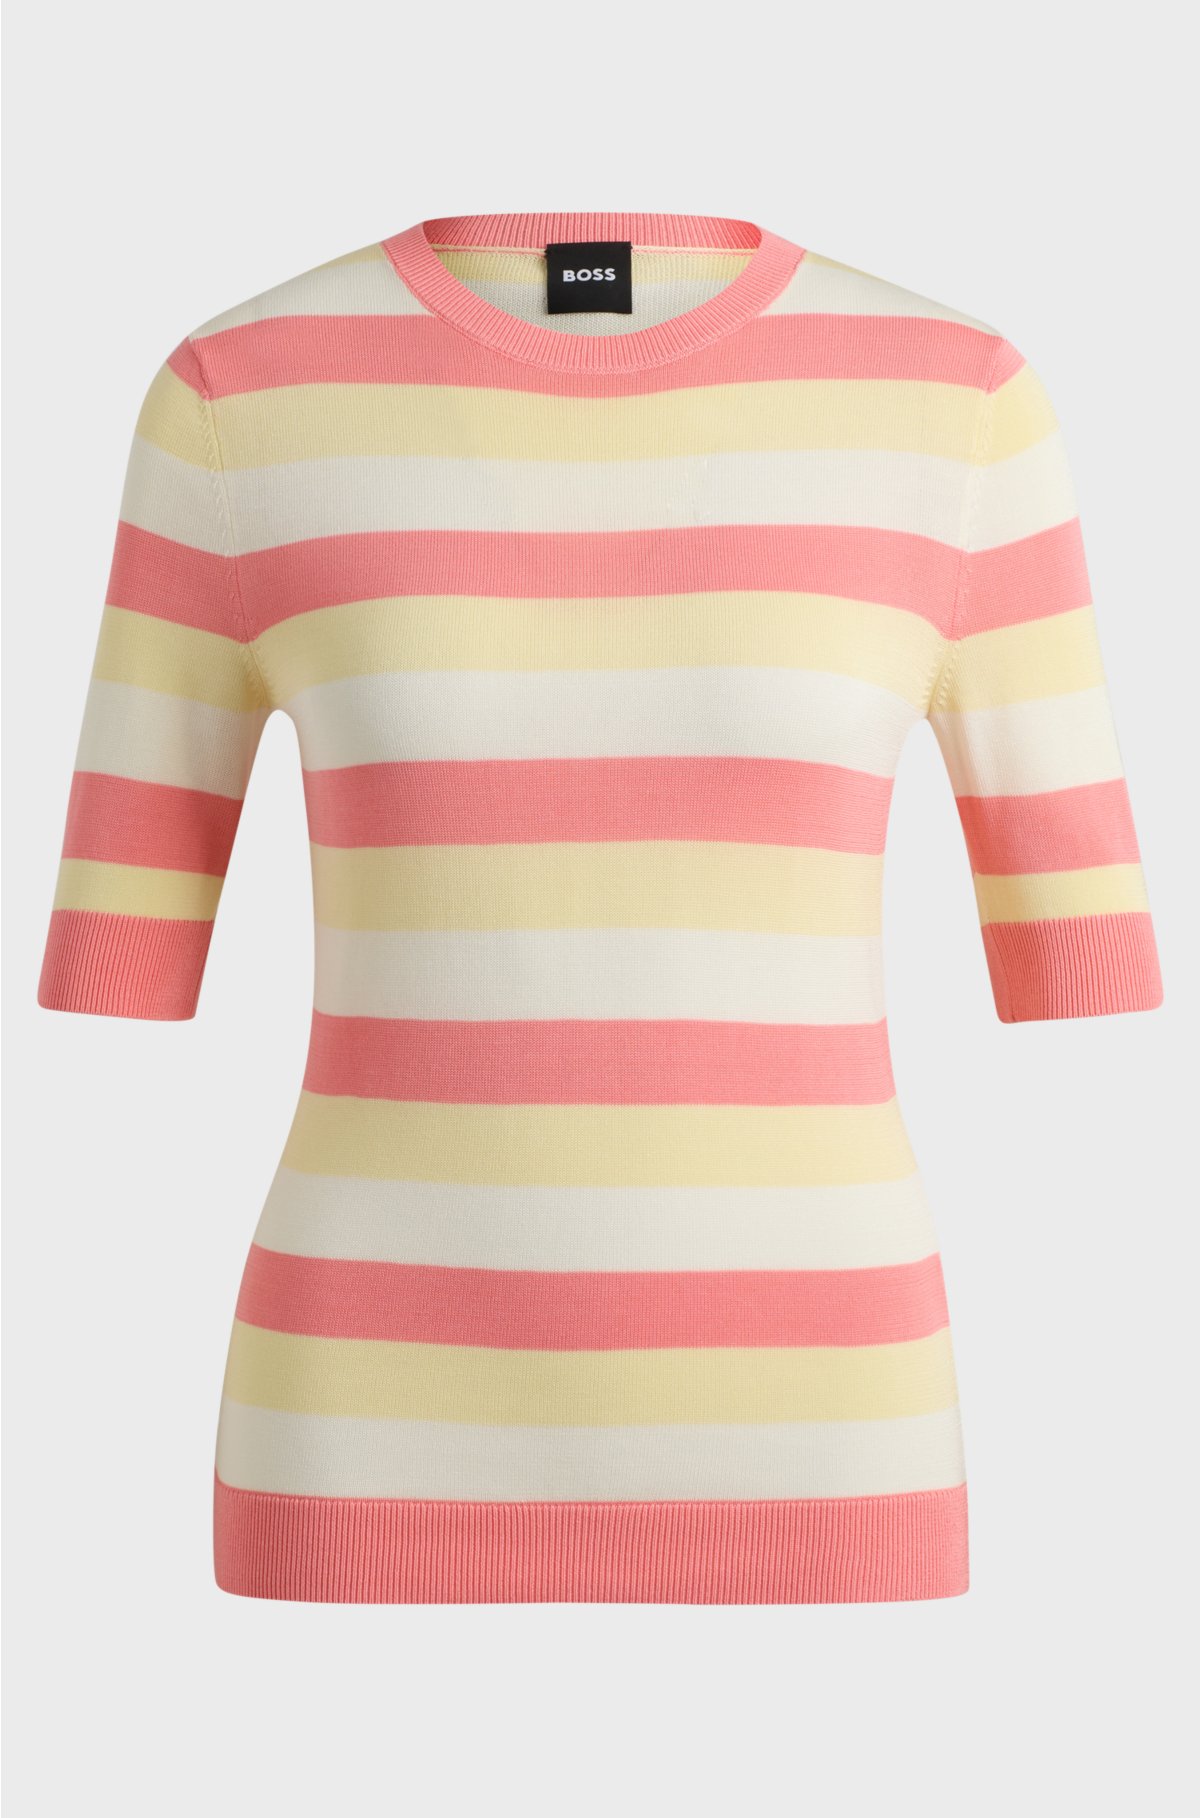 Cropped-sleeve sweater with horizontal stripes, Patterned